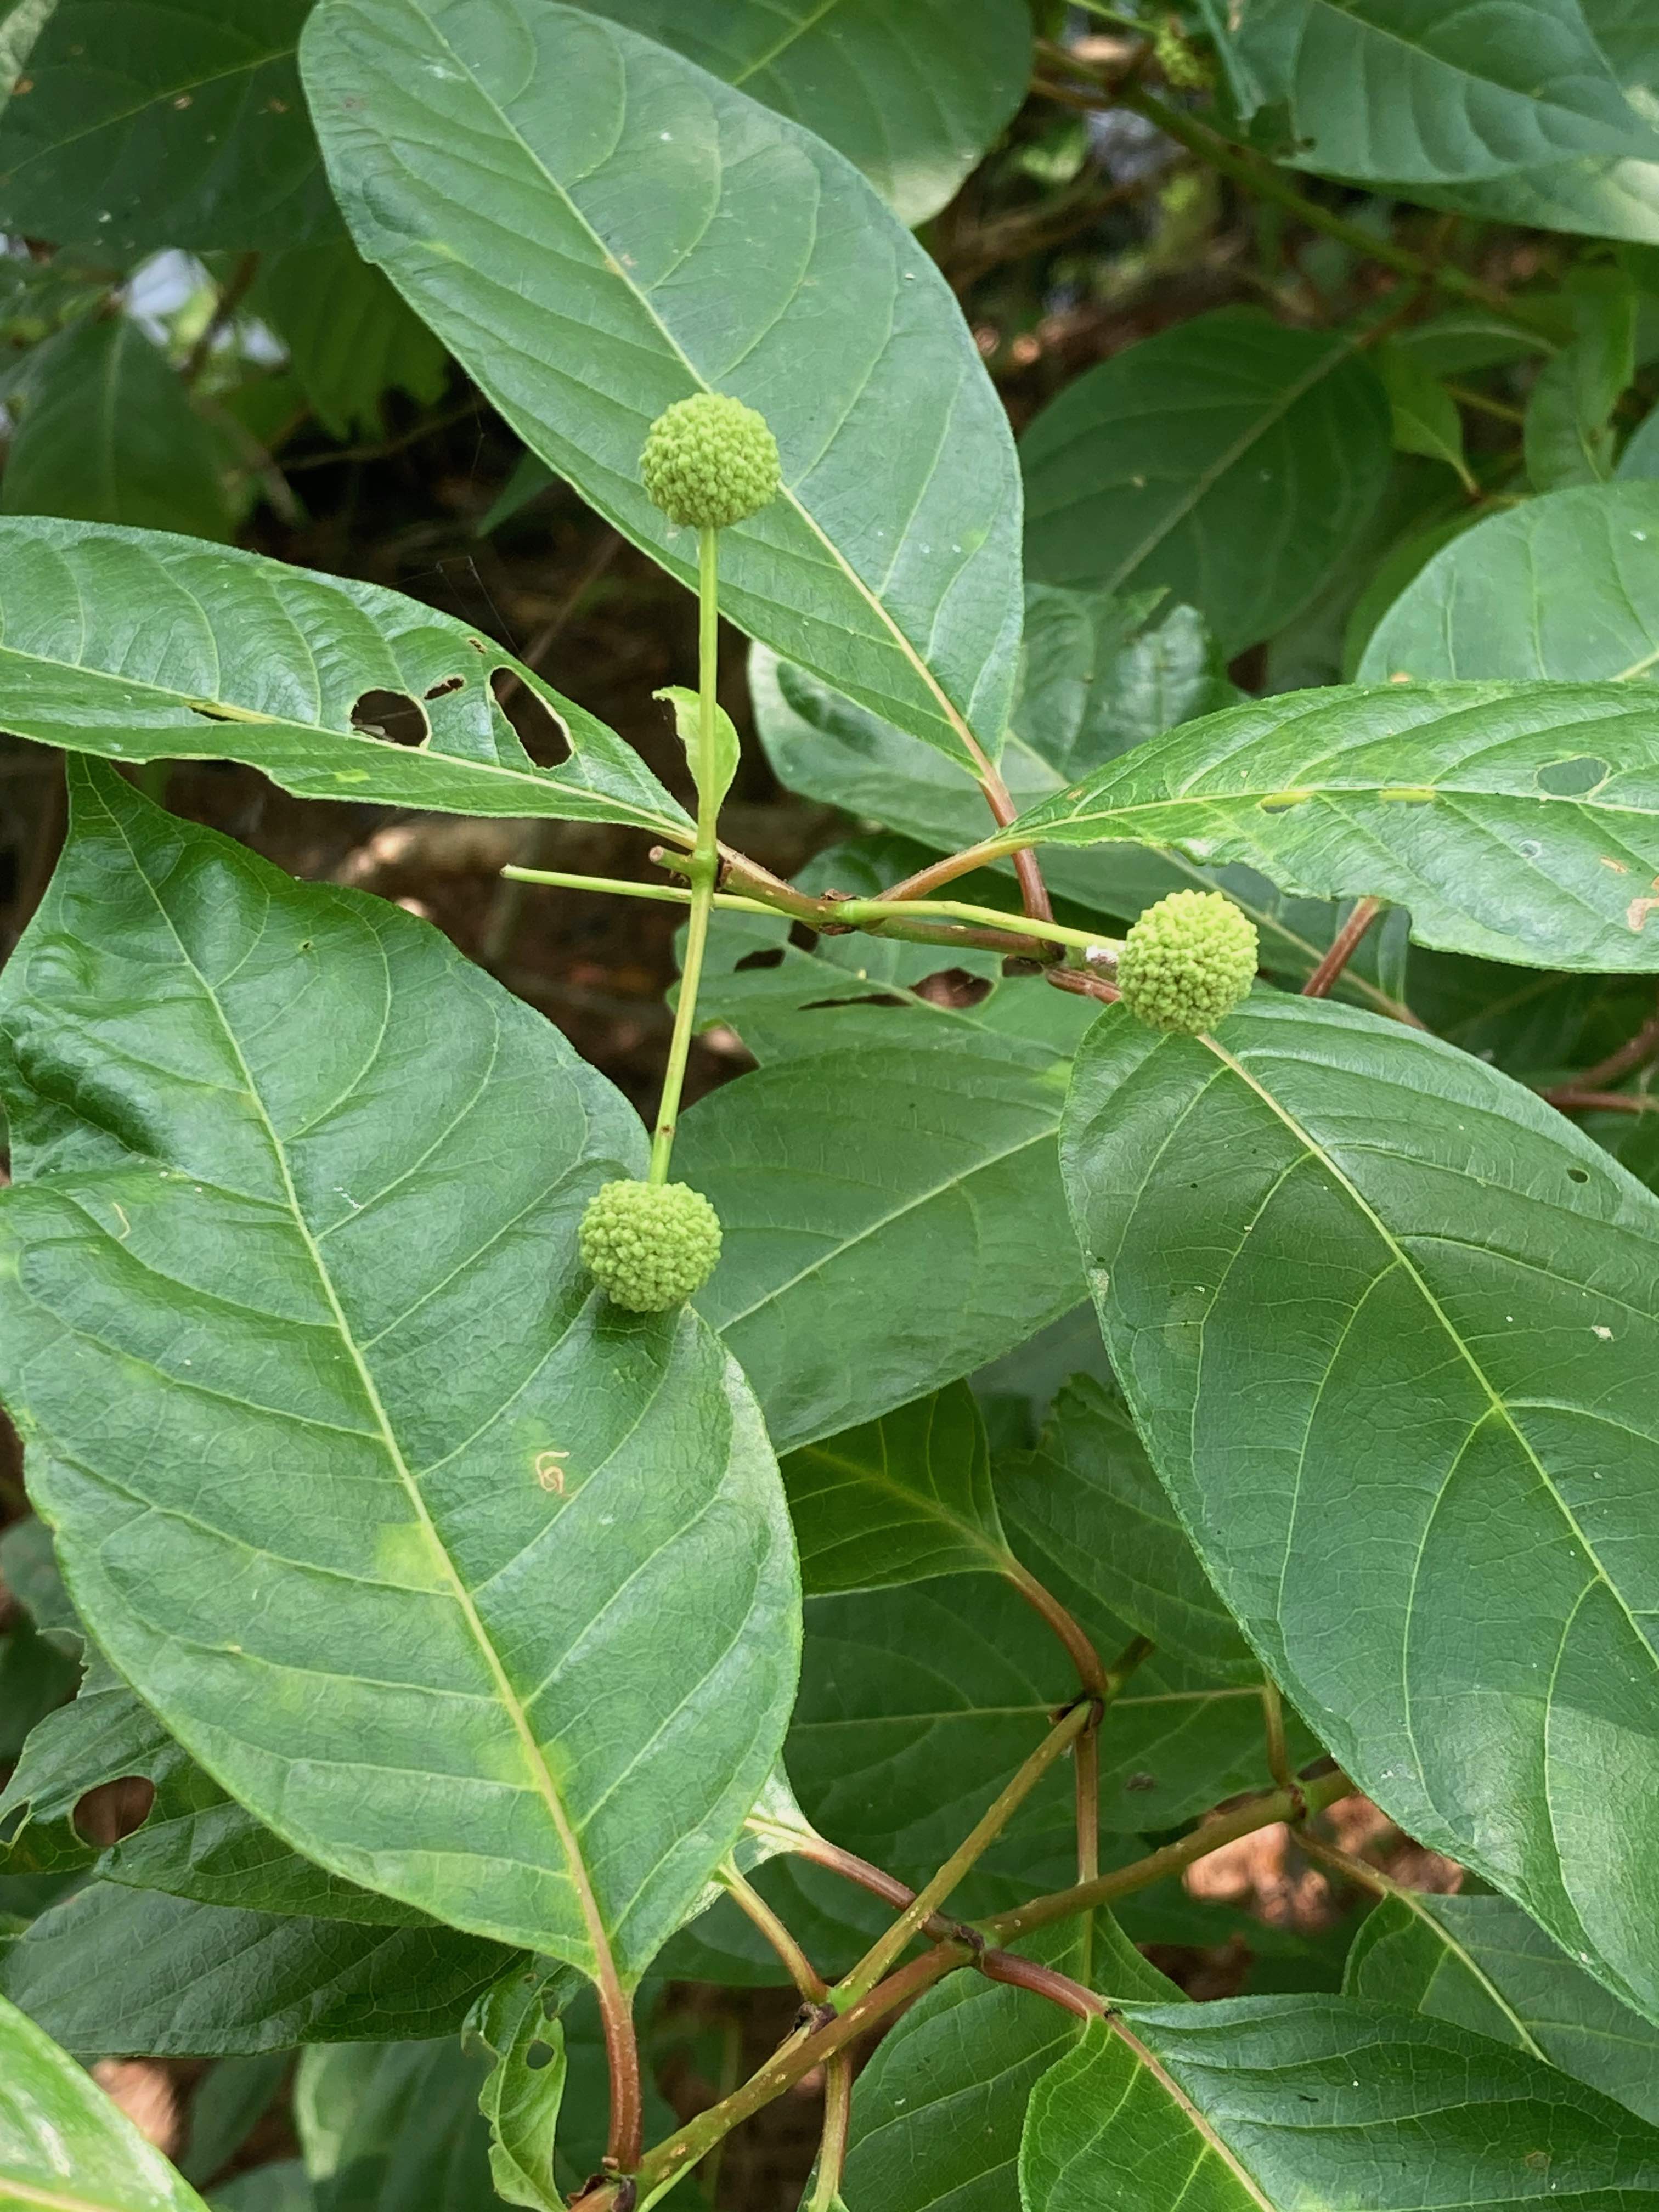 The Scientific Name is Cephalanthus occidentalis. You will likely hear them called Buttonbush. This picture shows the  Large, glossy deciduous leaves have entire margins and are opposite. of Cephalanthus occidentalis